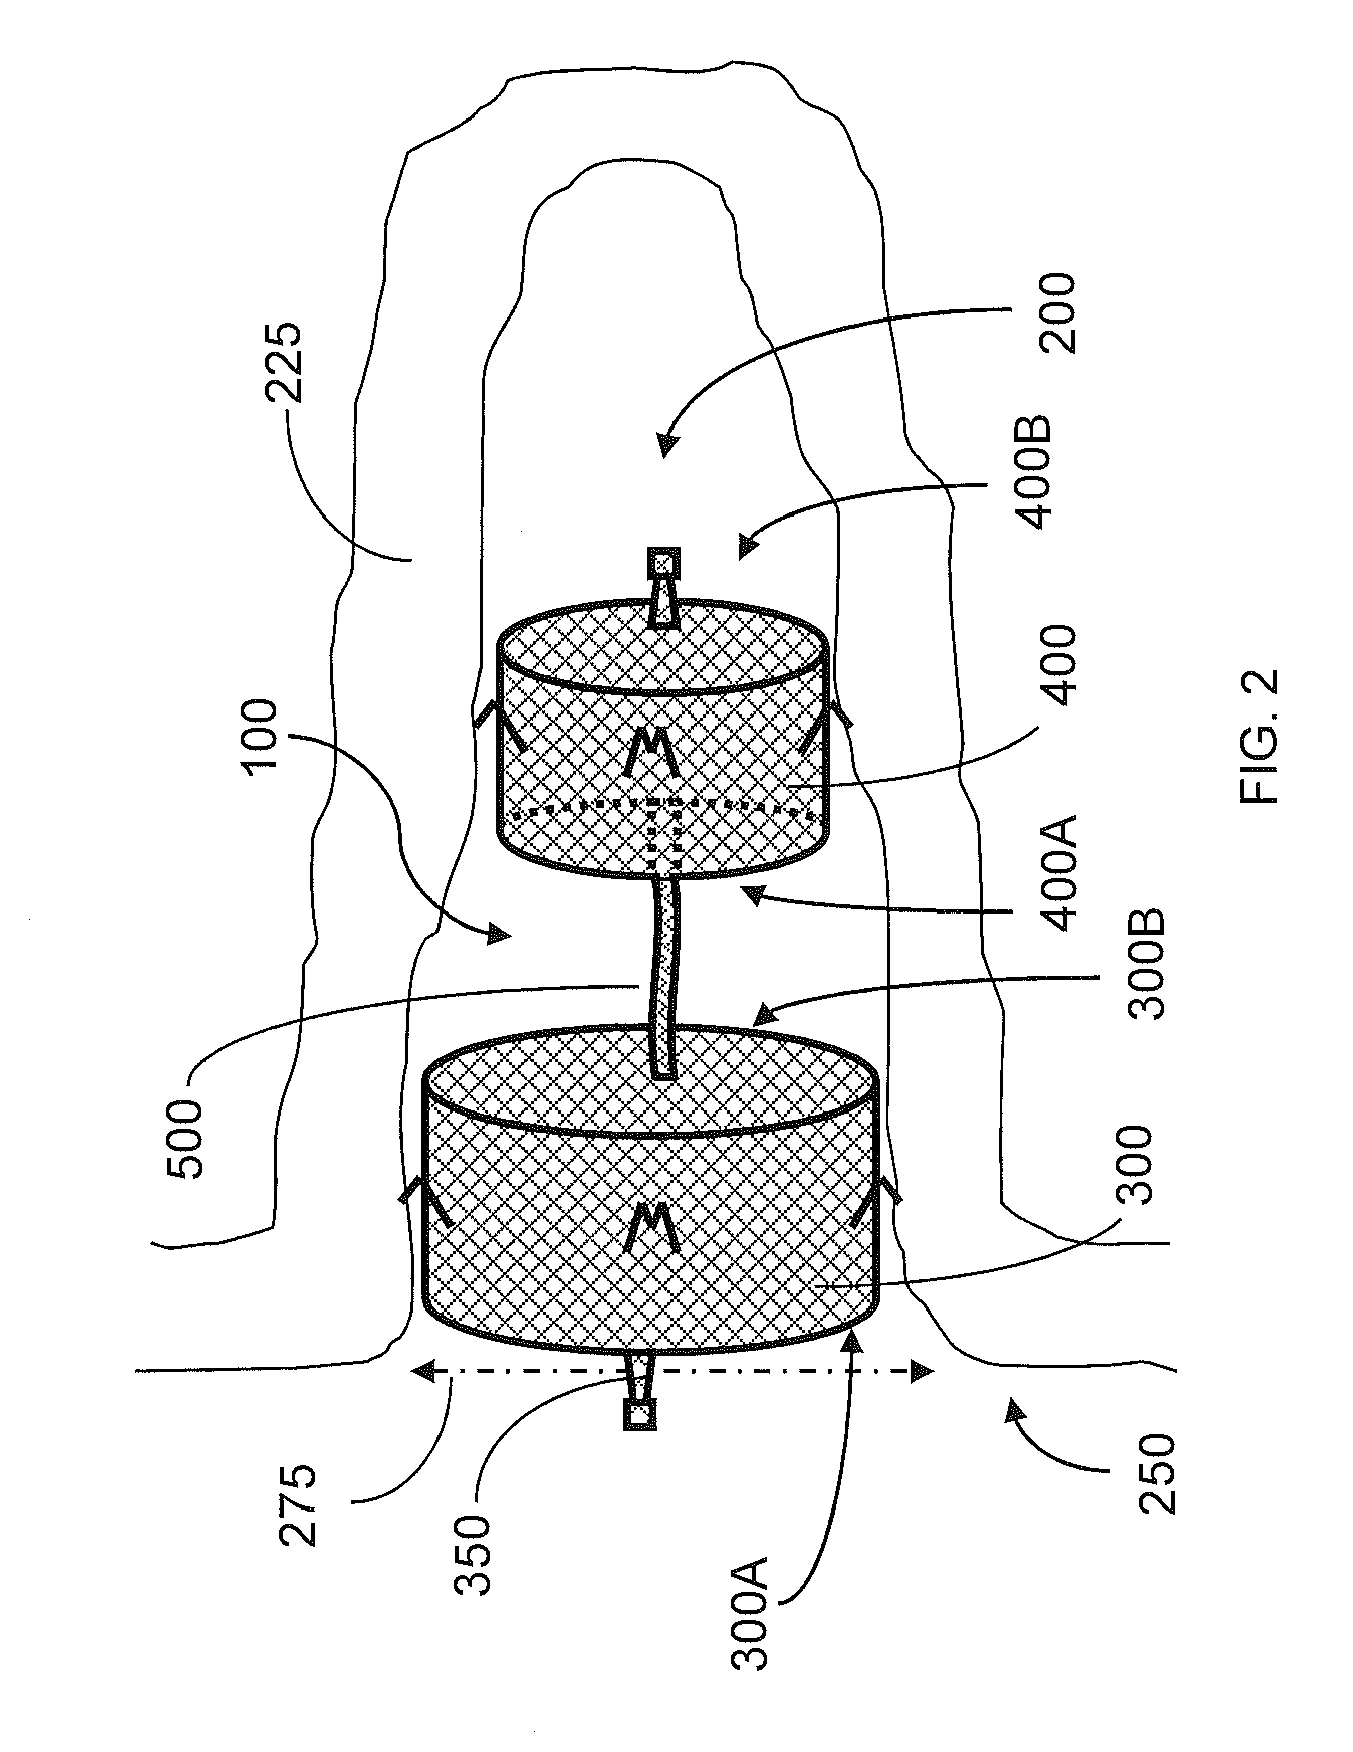 Occlusion device and associated deployment method